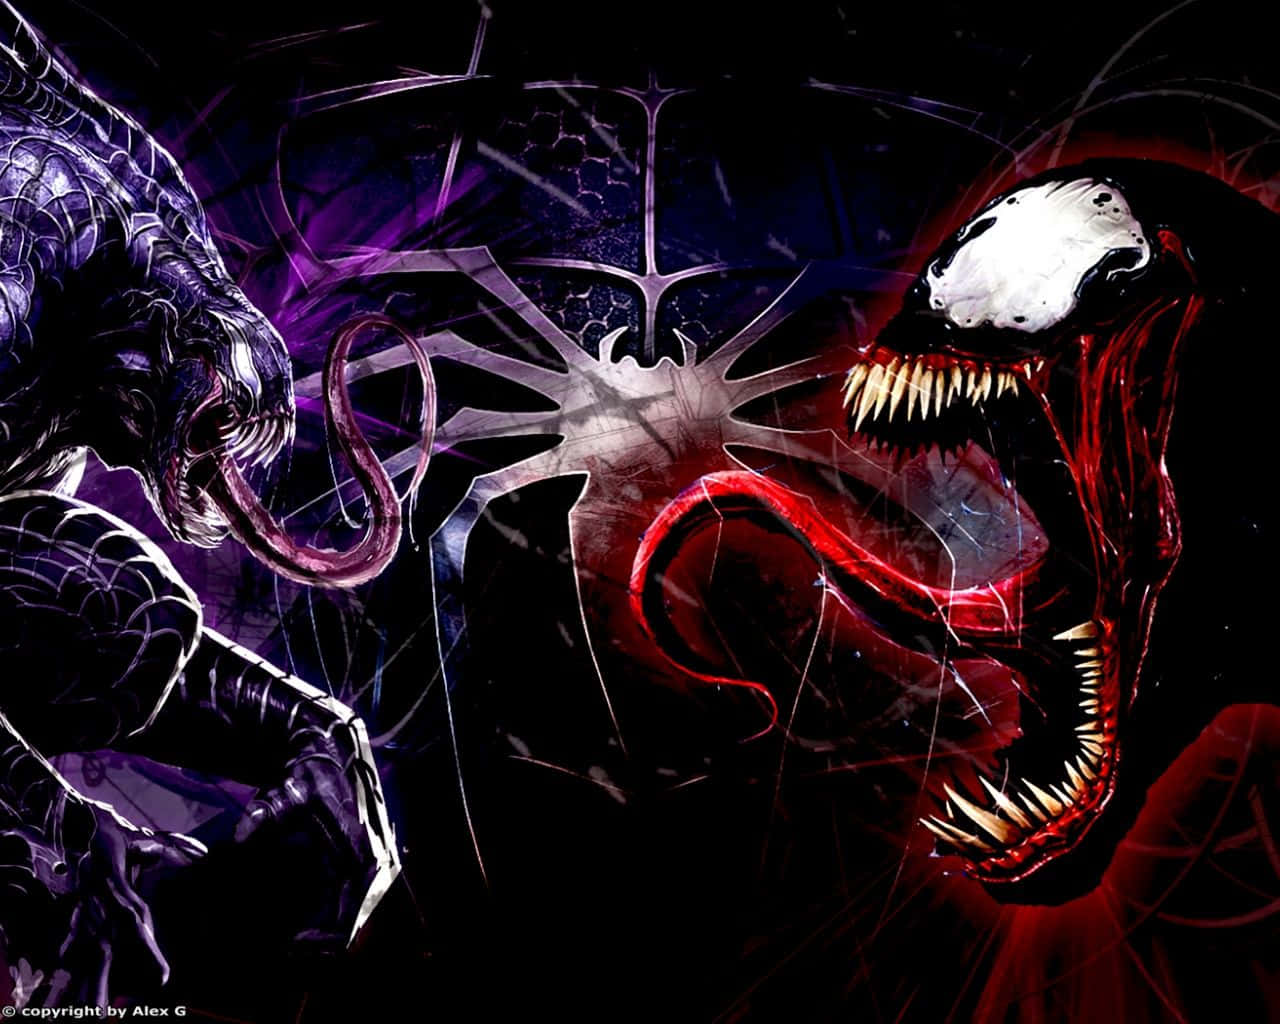 Venom in all its Spine Chilling Glory